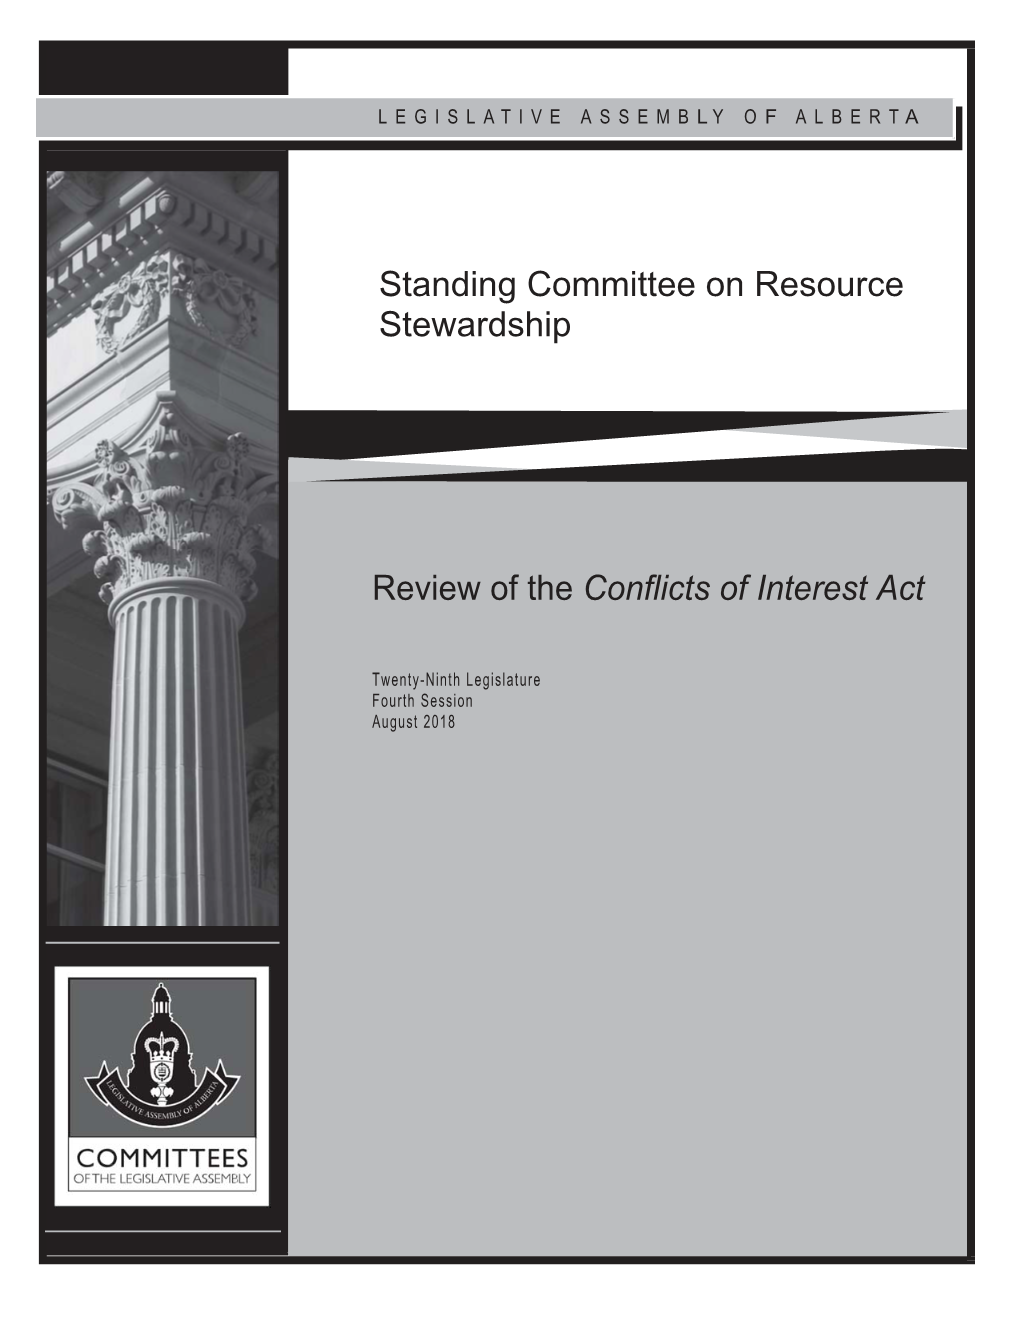 Review of the Conflicts of Interest Act